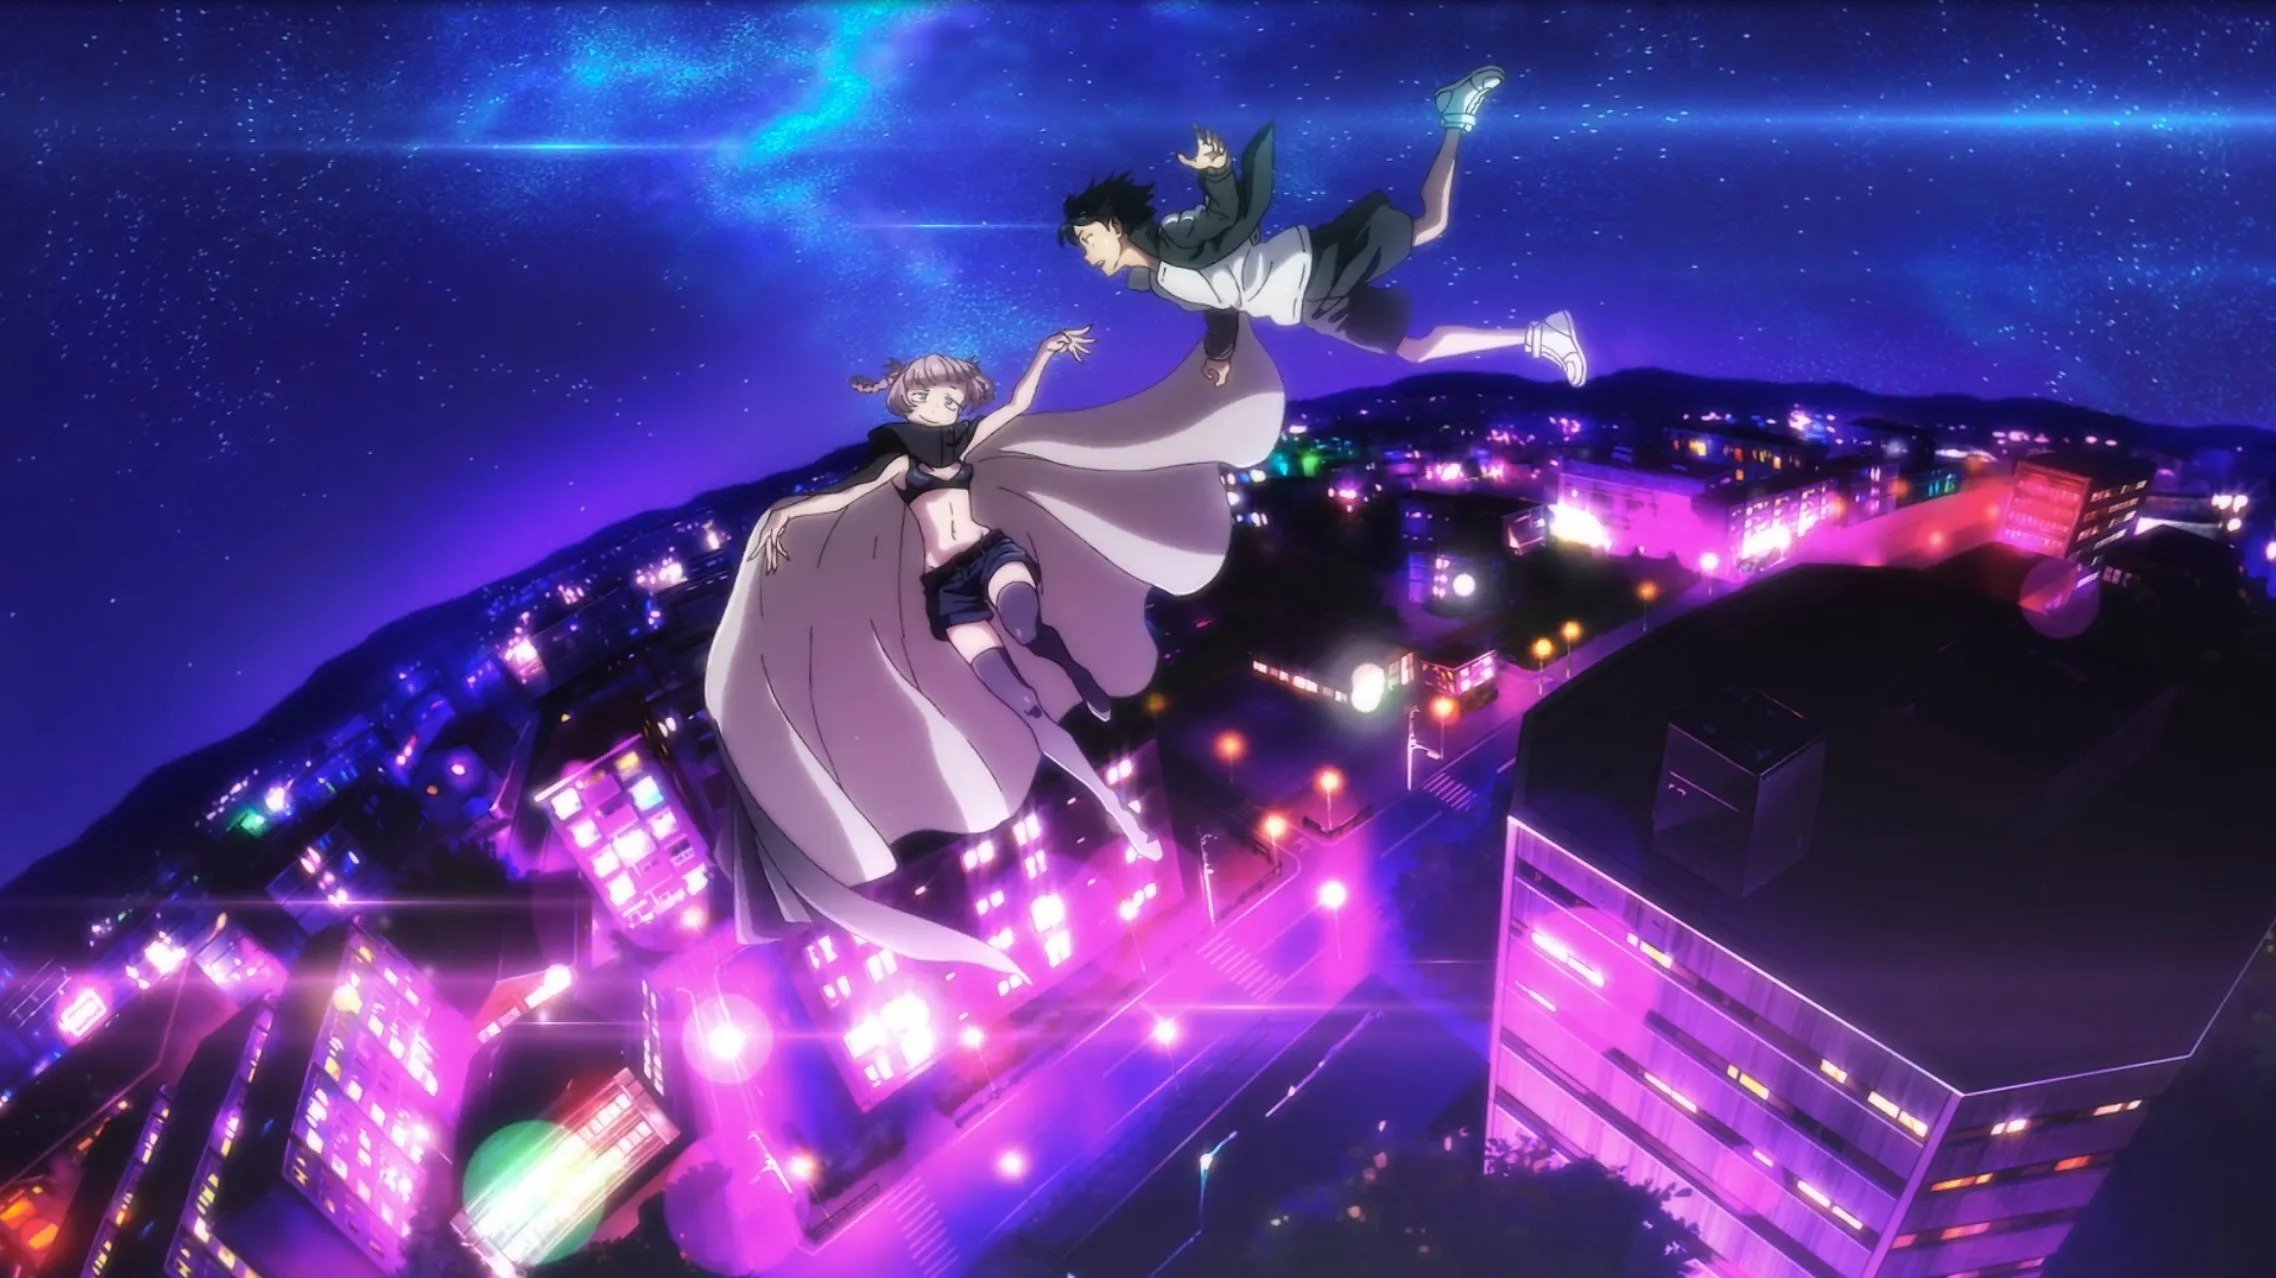 Kou Yamori and Nazuna Nanakusa from "Call Of The Night" (2022) hover in the night sky over the bright city. 